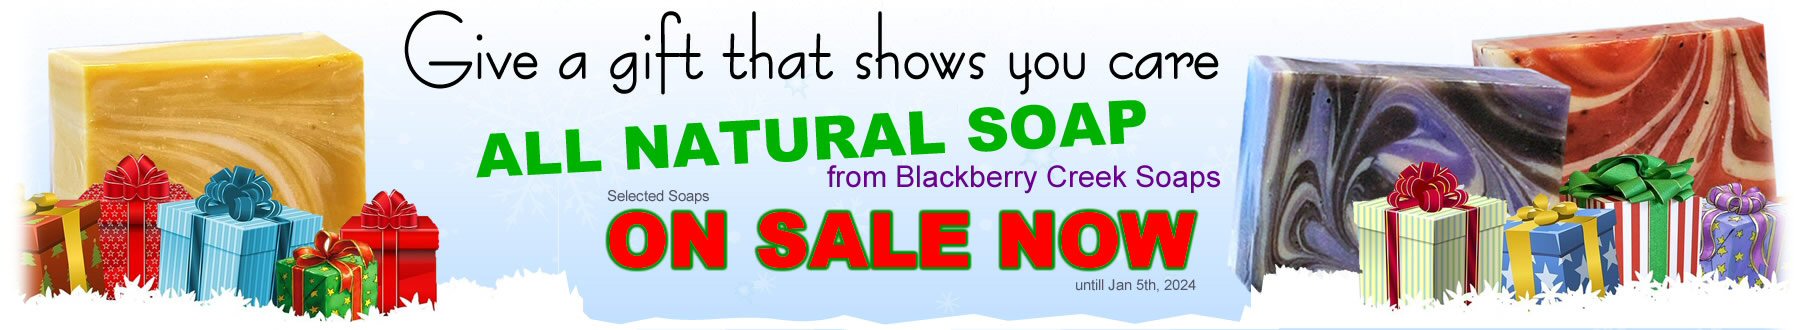 Holiday Sale - selected soaps $3.50